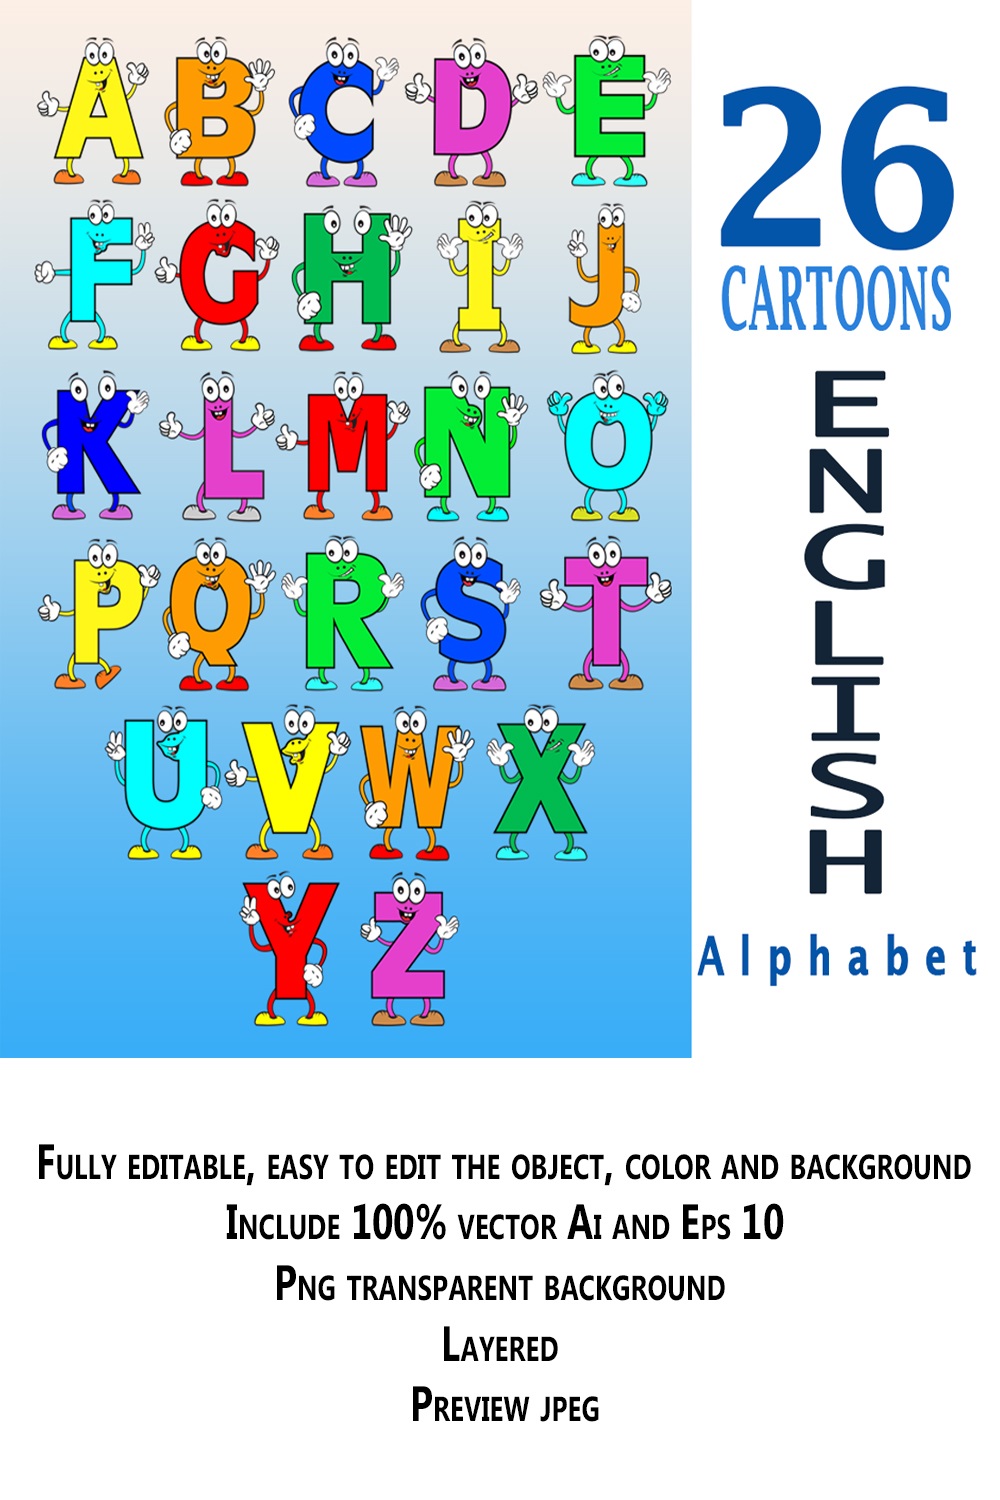 26 English Alphabet Cartoon Characters pinterest preview image.